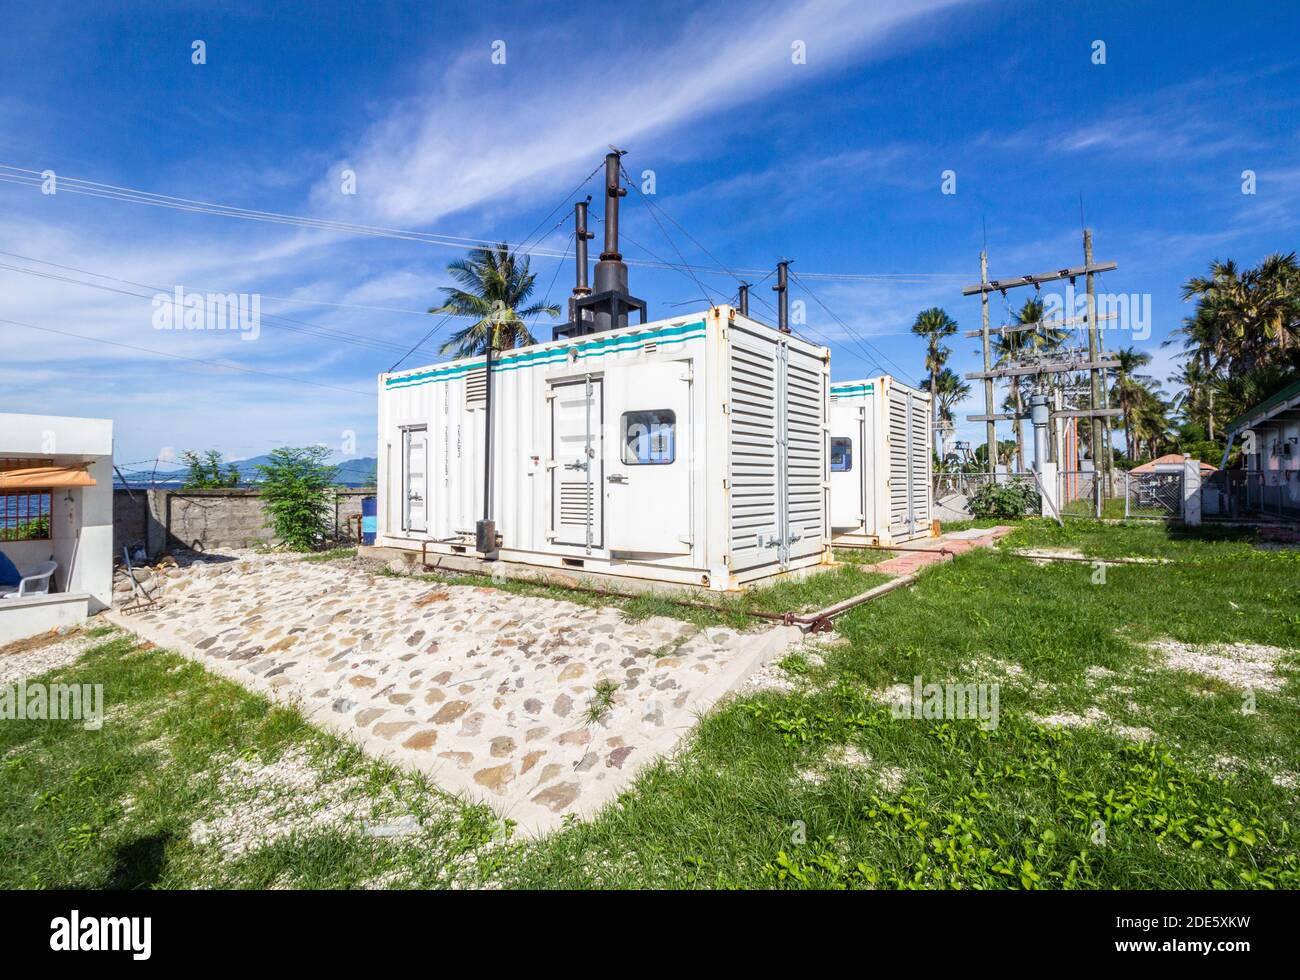 A small power generation facility in Tingloy Island off Batangas, Philippines Stock Photo